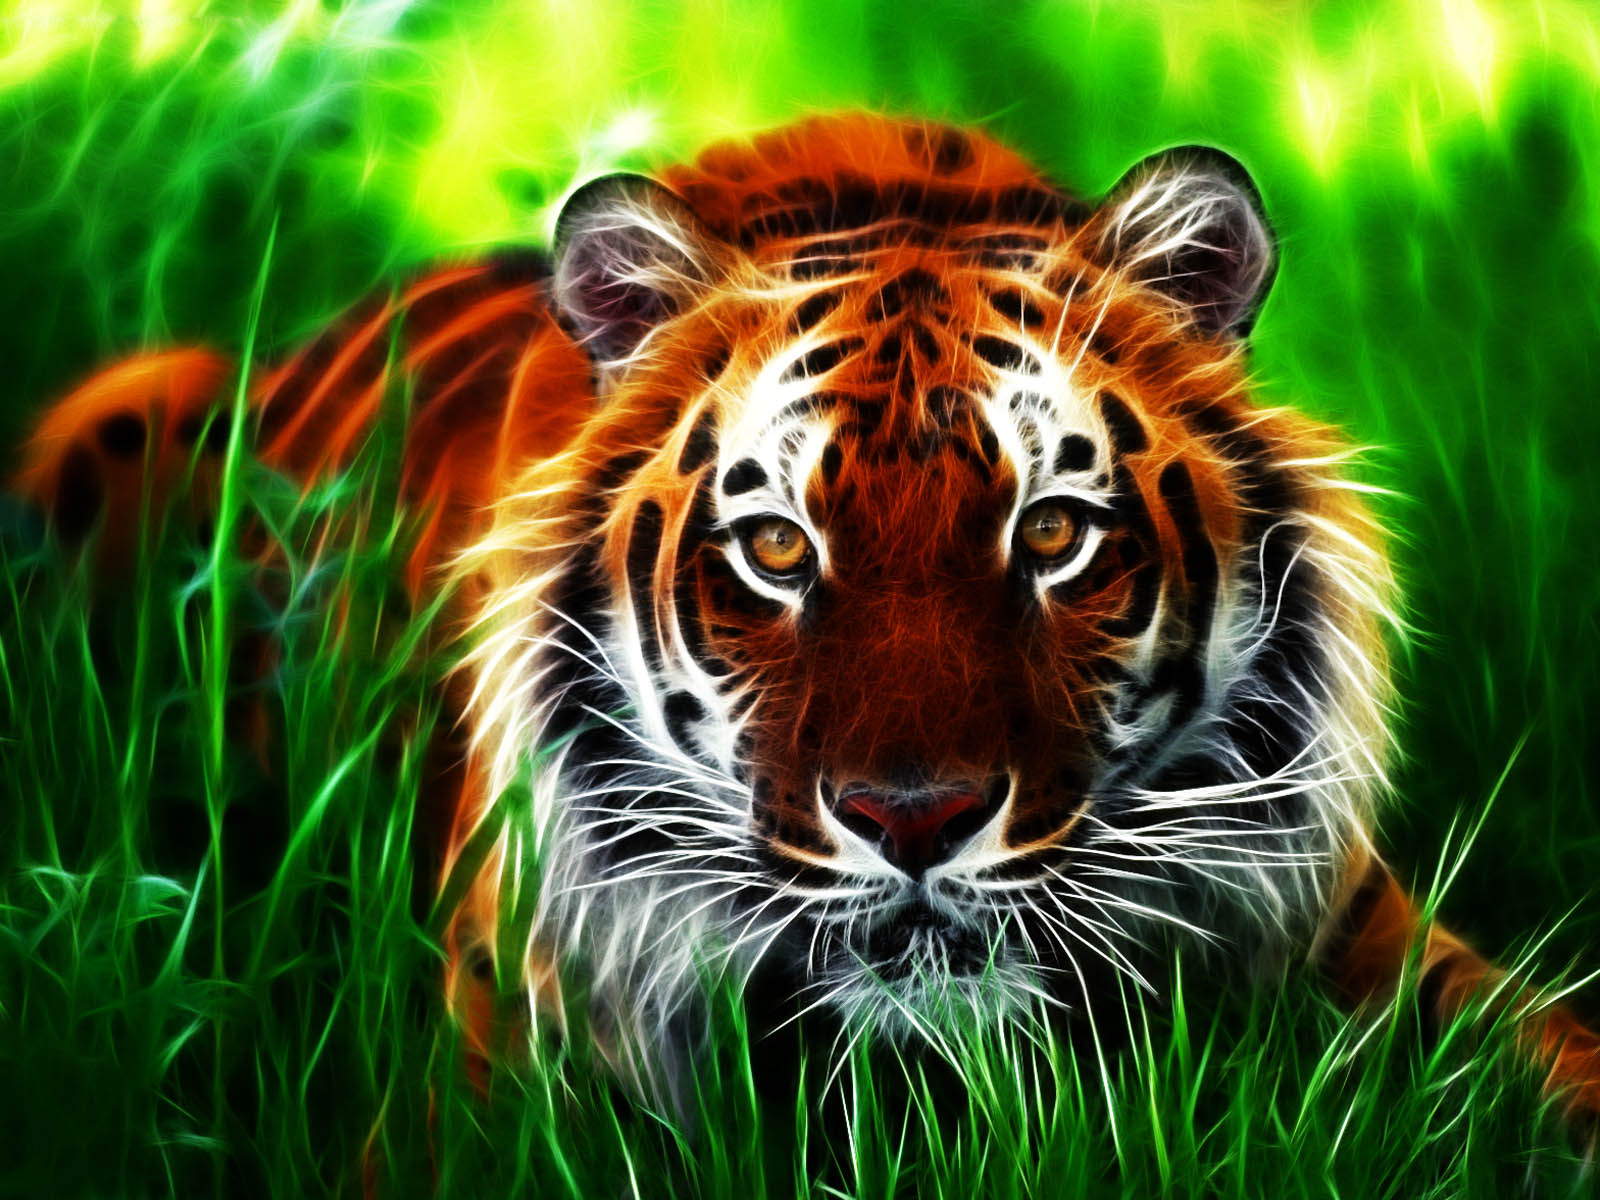 Tiger 3d Wallpaper Image Paos Pictures And Background For